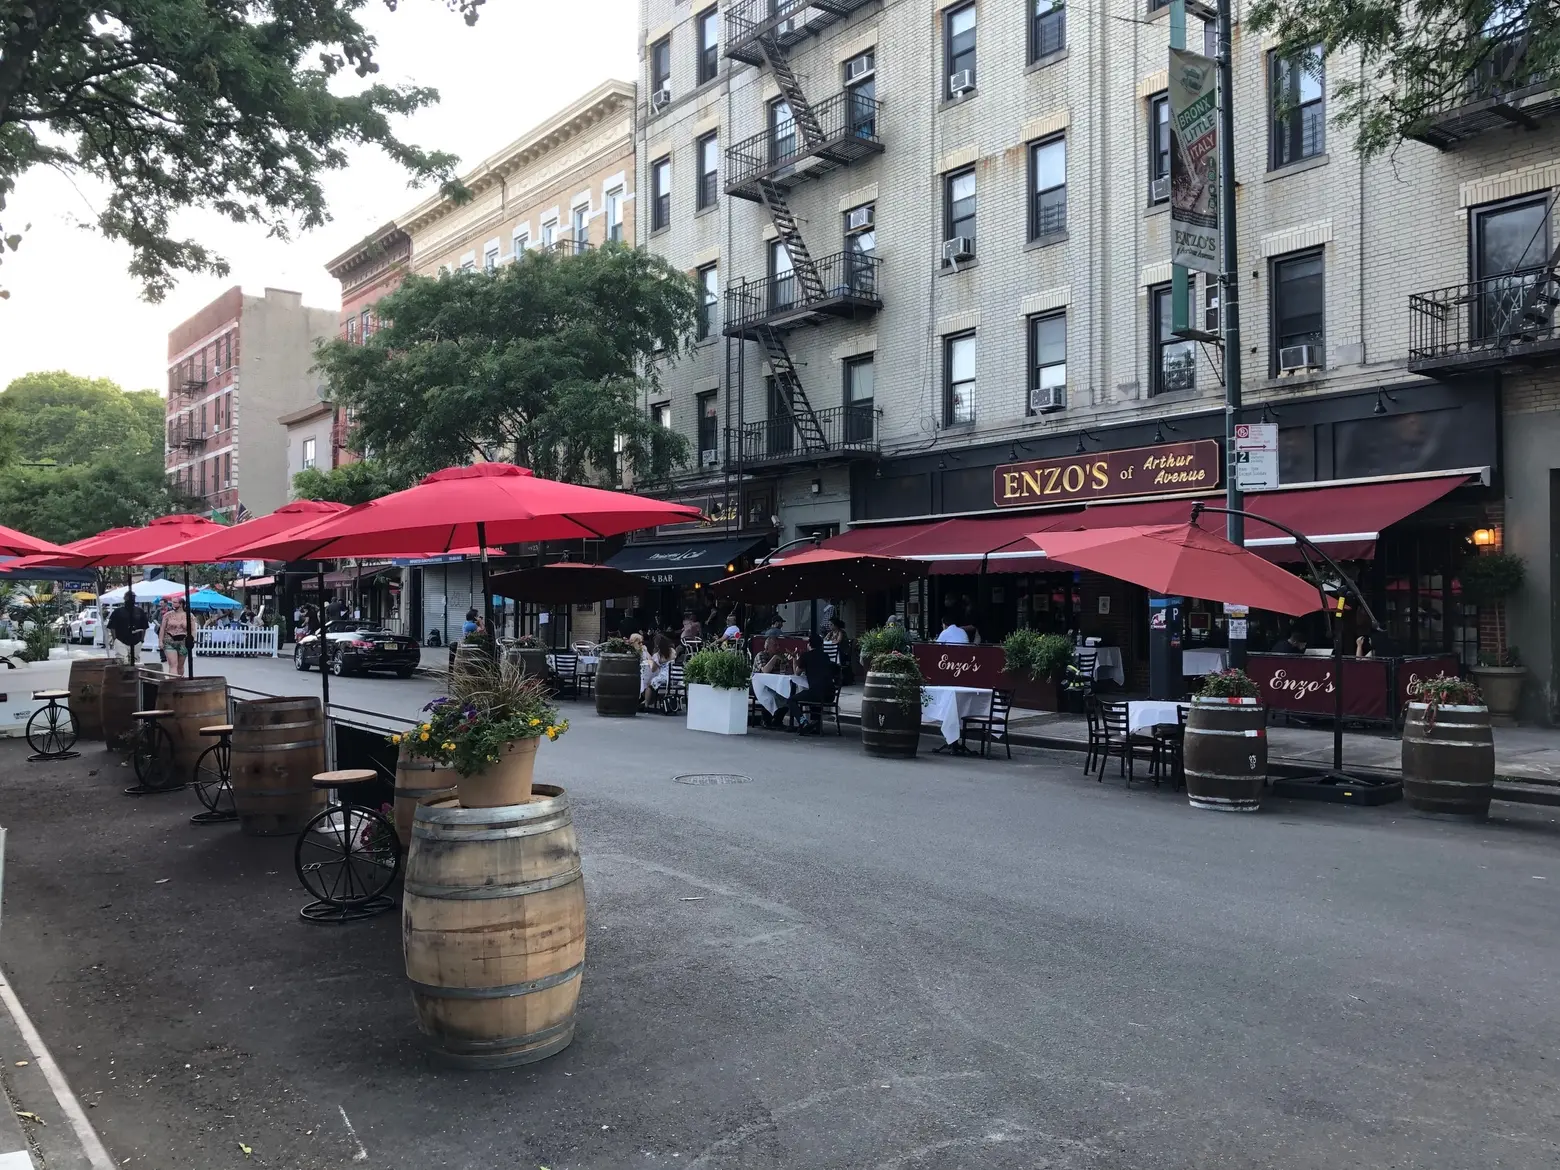 Bronx Little Italy sets up ‘Piazza di Belmont’ for outdoor dining on Arthur Avenue